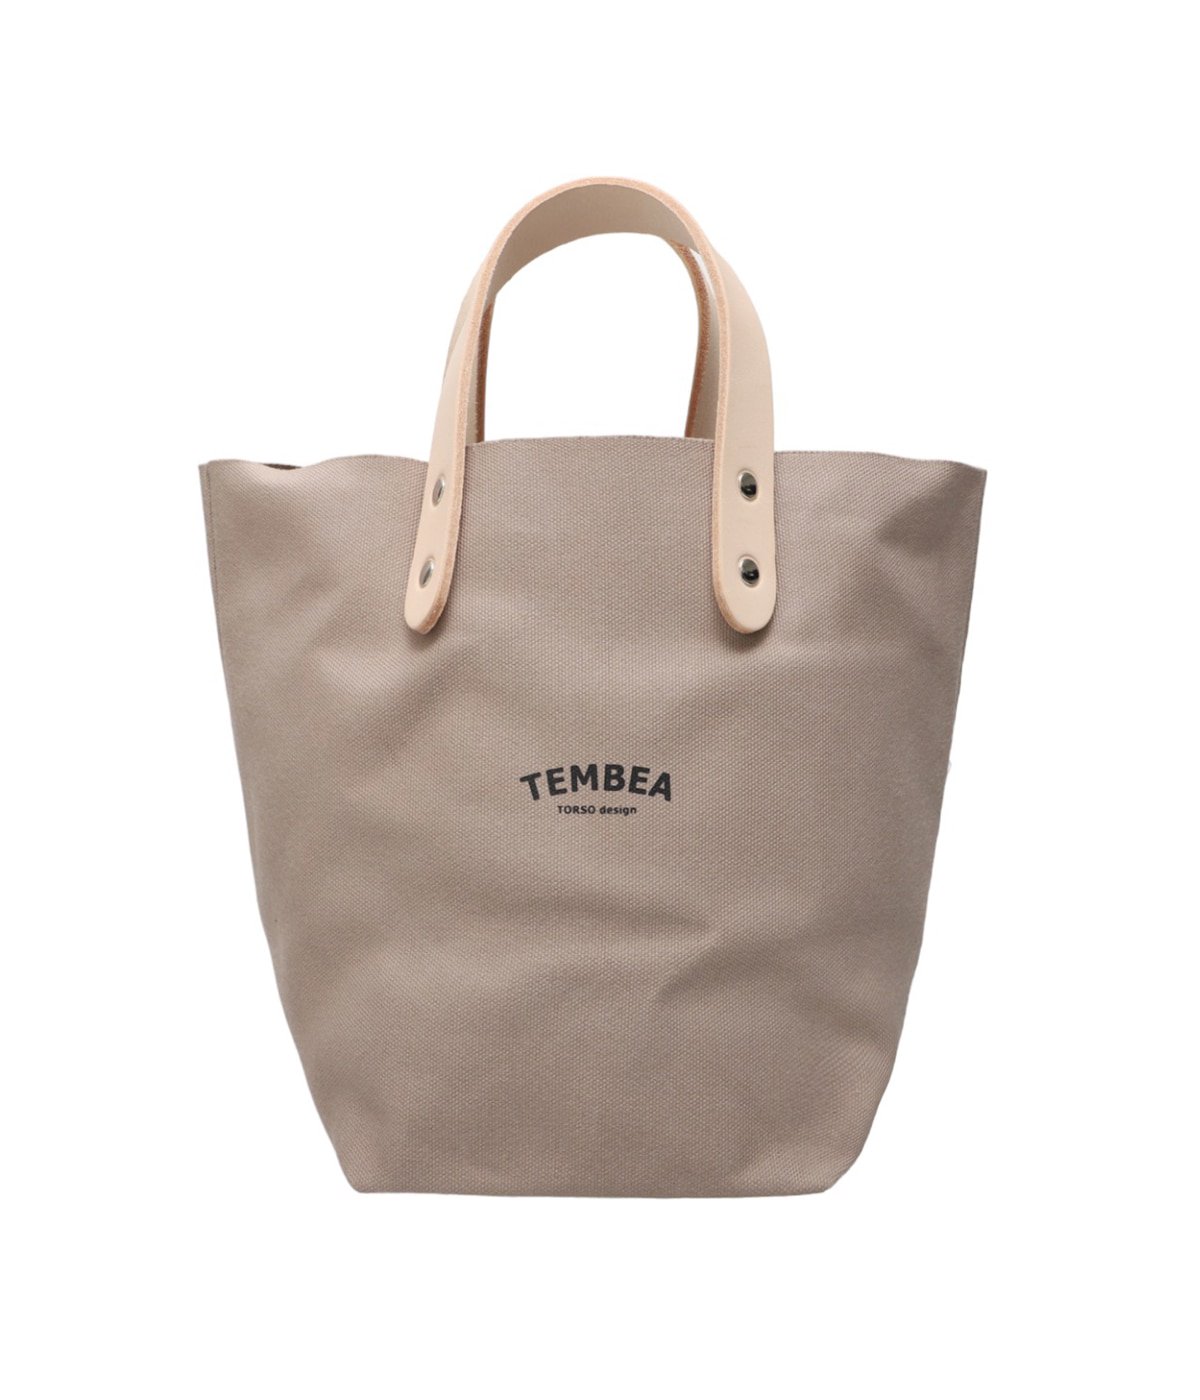 DELIVERY TOTE SMALL | TEMBEA(テンベア) / バッグ トートバッグ 